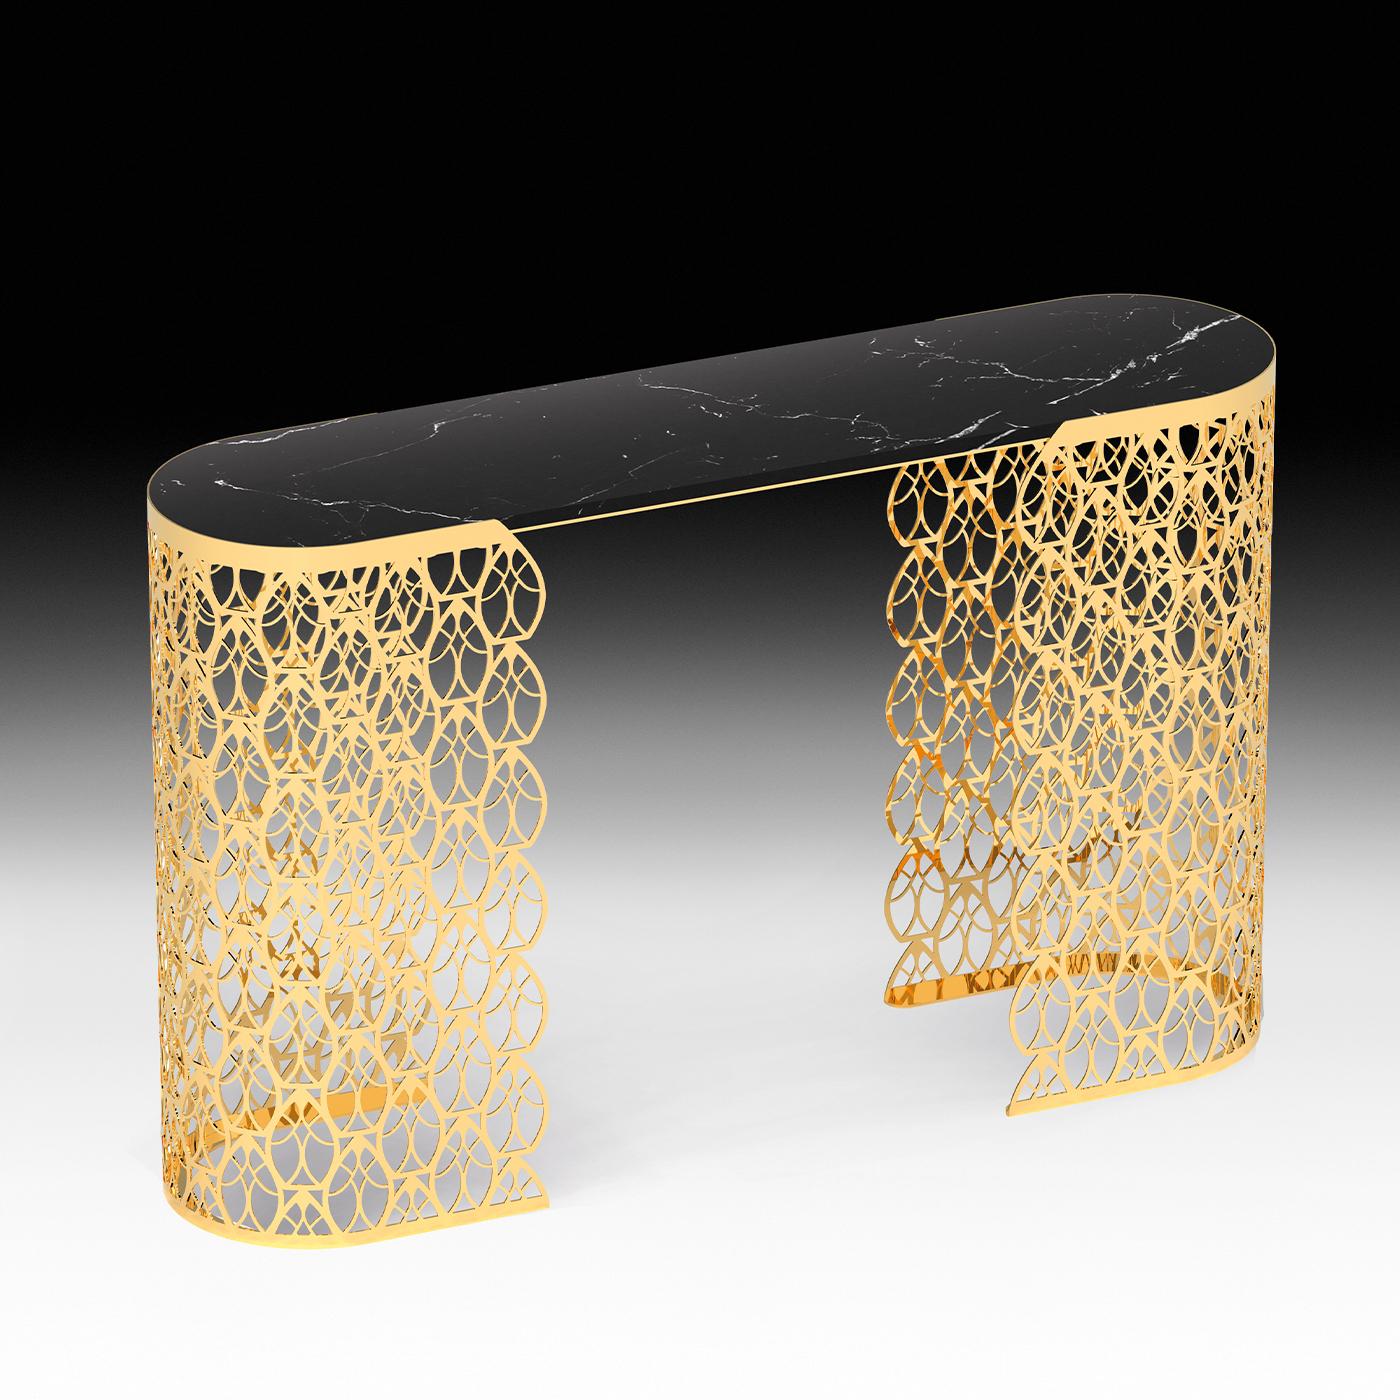 The soft lines and unique style of the Arabesque Fitzgerald Console make it the ideal choice for a luxurious modern living room and foyer or hotel lounge. Striking a beautiful balance of both Art Deco and contemporary inspiration, this glamorous